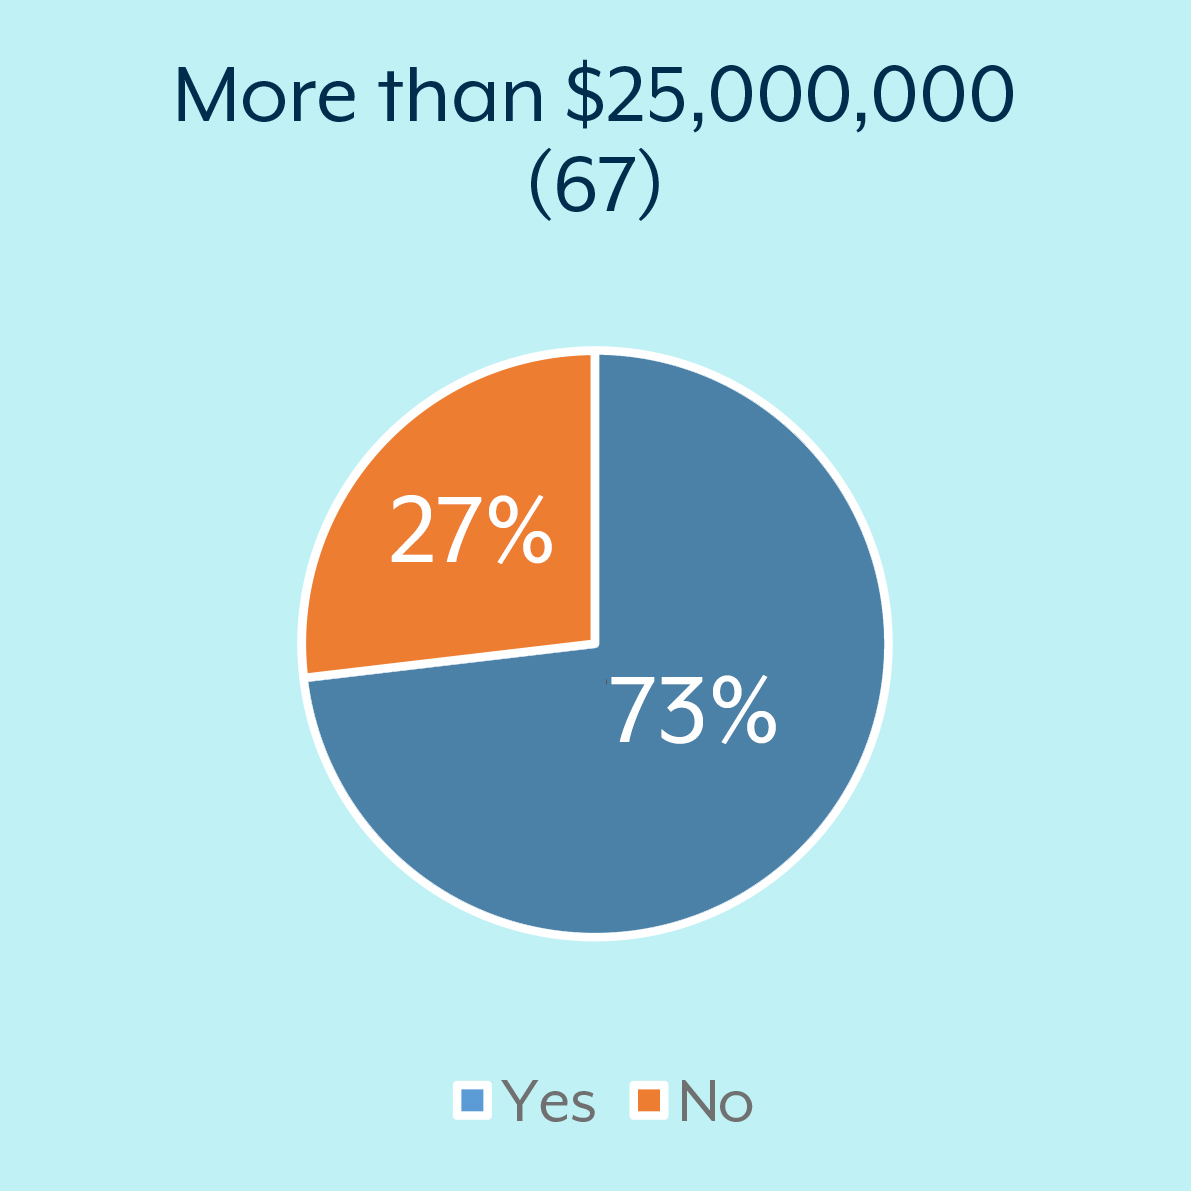 More than $25 million: Yes = 73% No = 27%